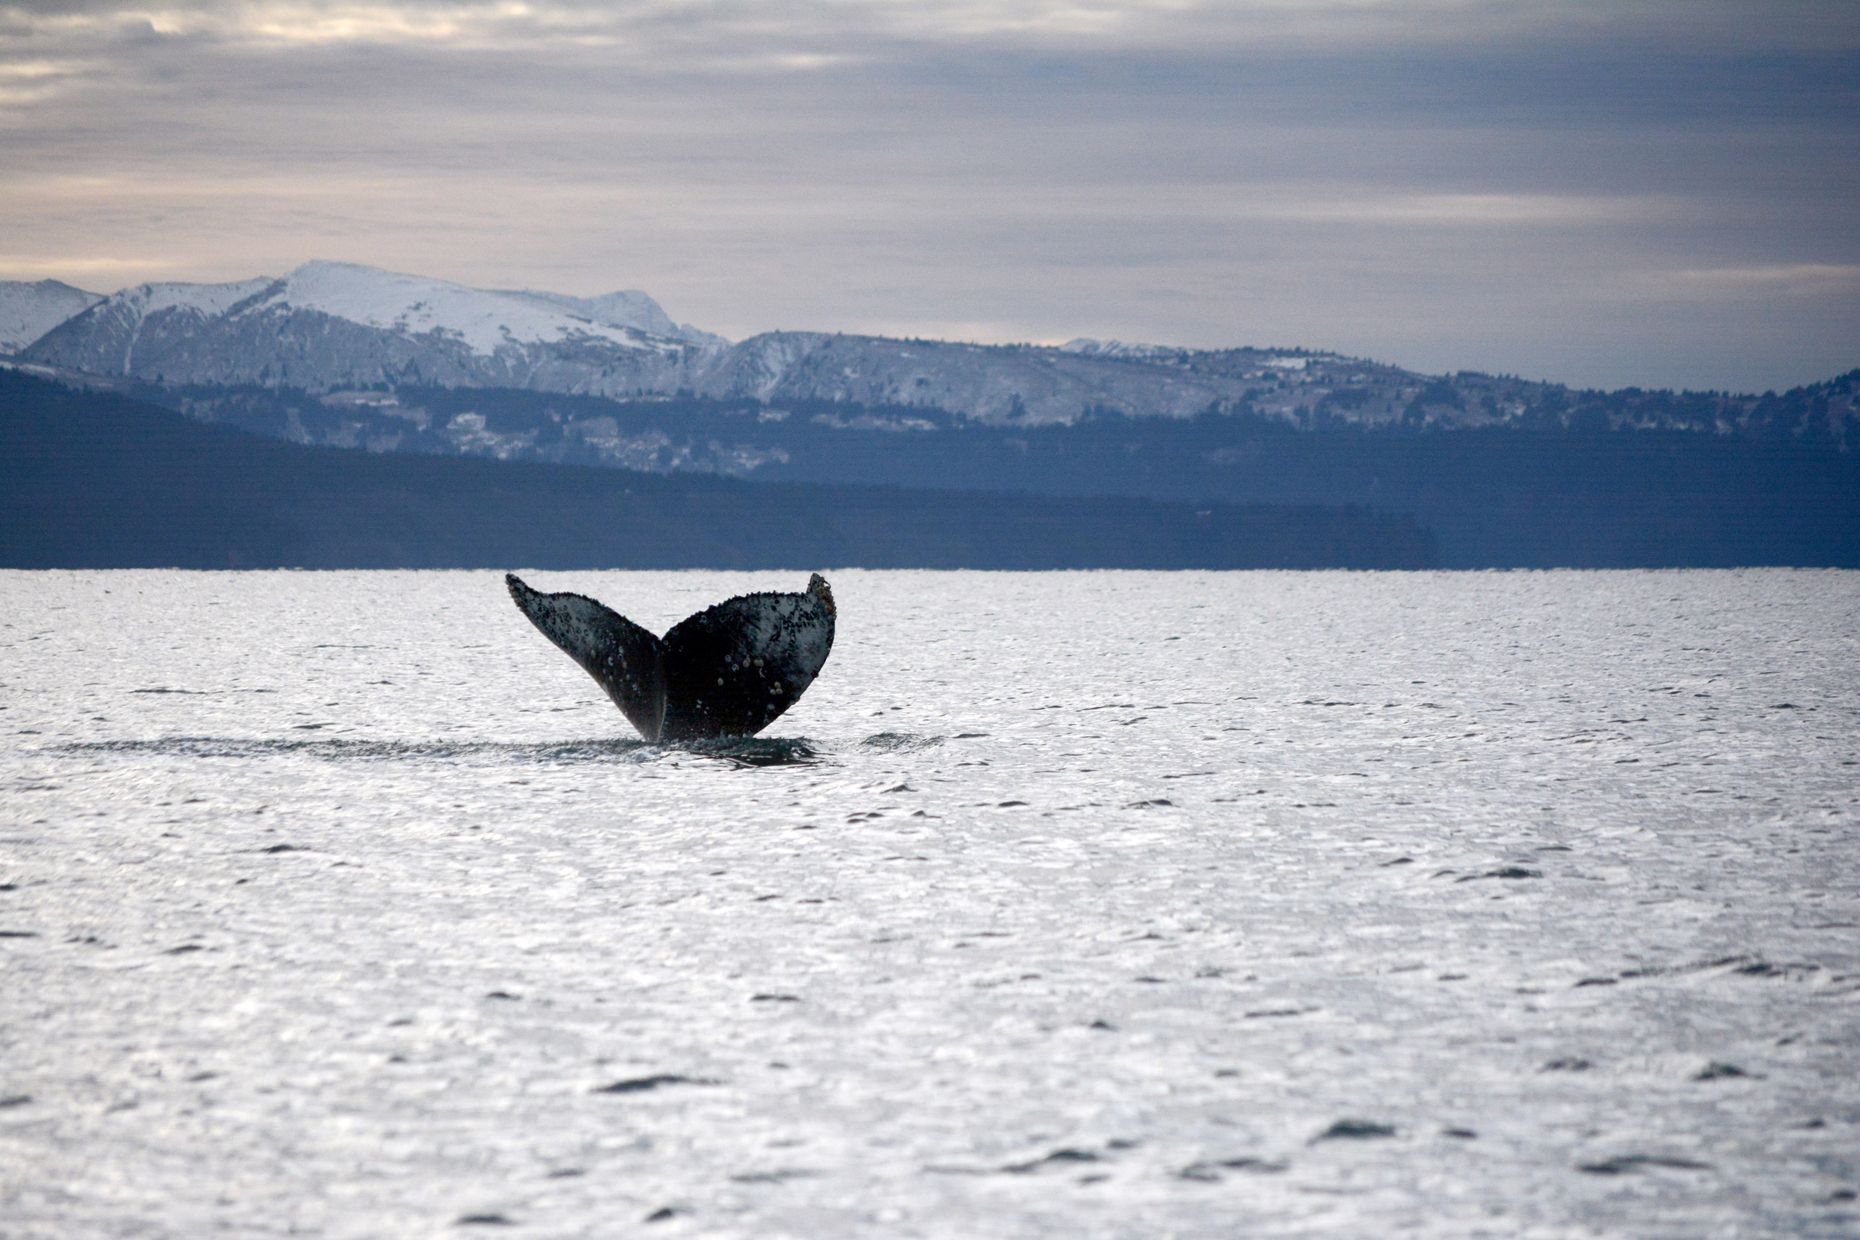 A humpback whale dives in Kachemak Bay on Sunday afternoon. Whales continue to be seen in the bay this month. At least a dozen whales were spotted on a boat trip, with some swimming in pairs.-Photo by Michael Armstrong, Homer News